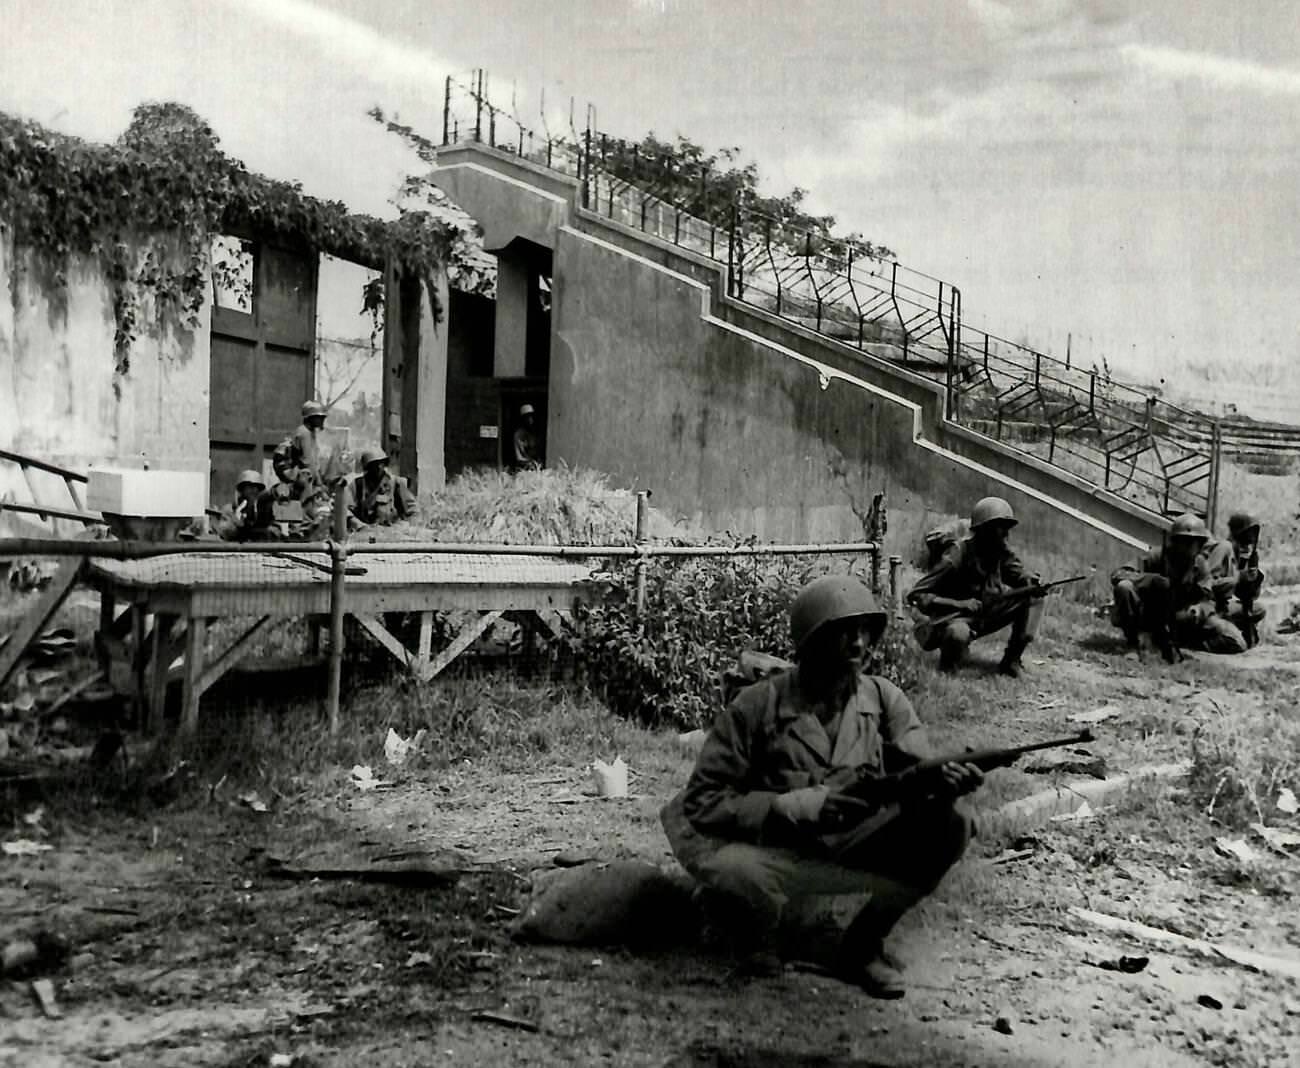 American machine gunners and riflemen defend against Japanese forces from positions at a Manila stadium's back wall, Philippines, 1945.